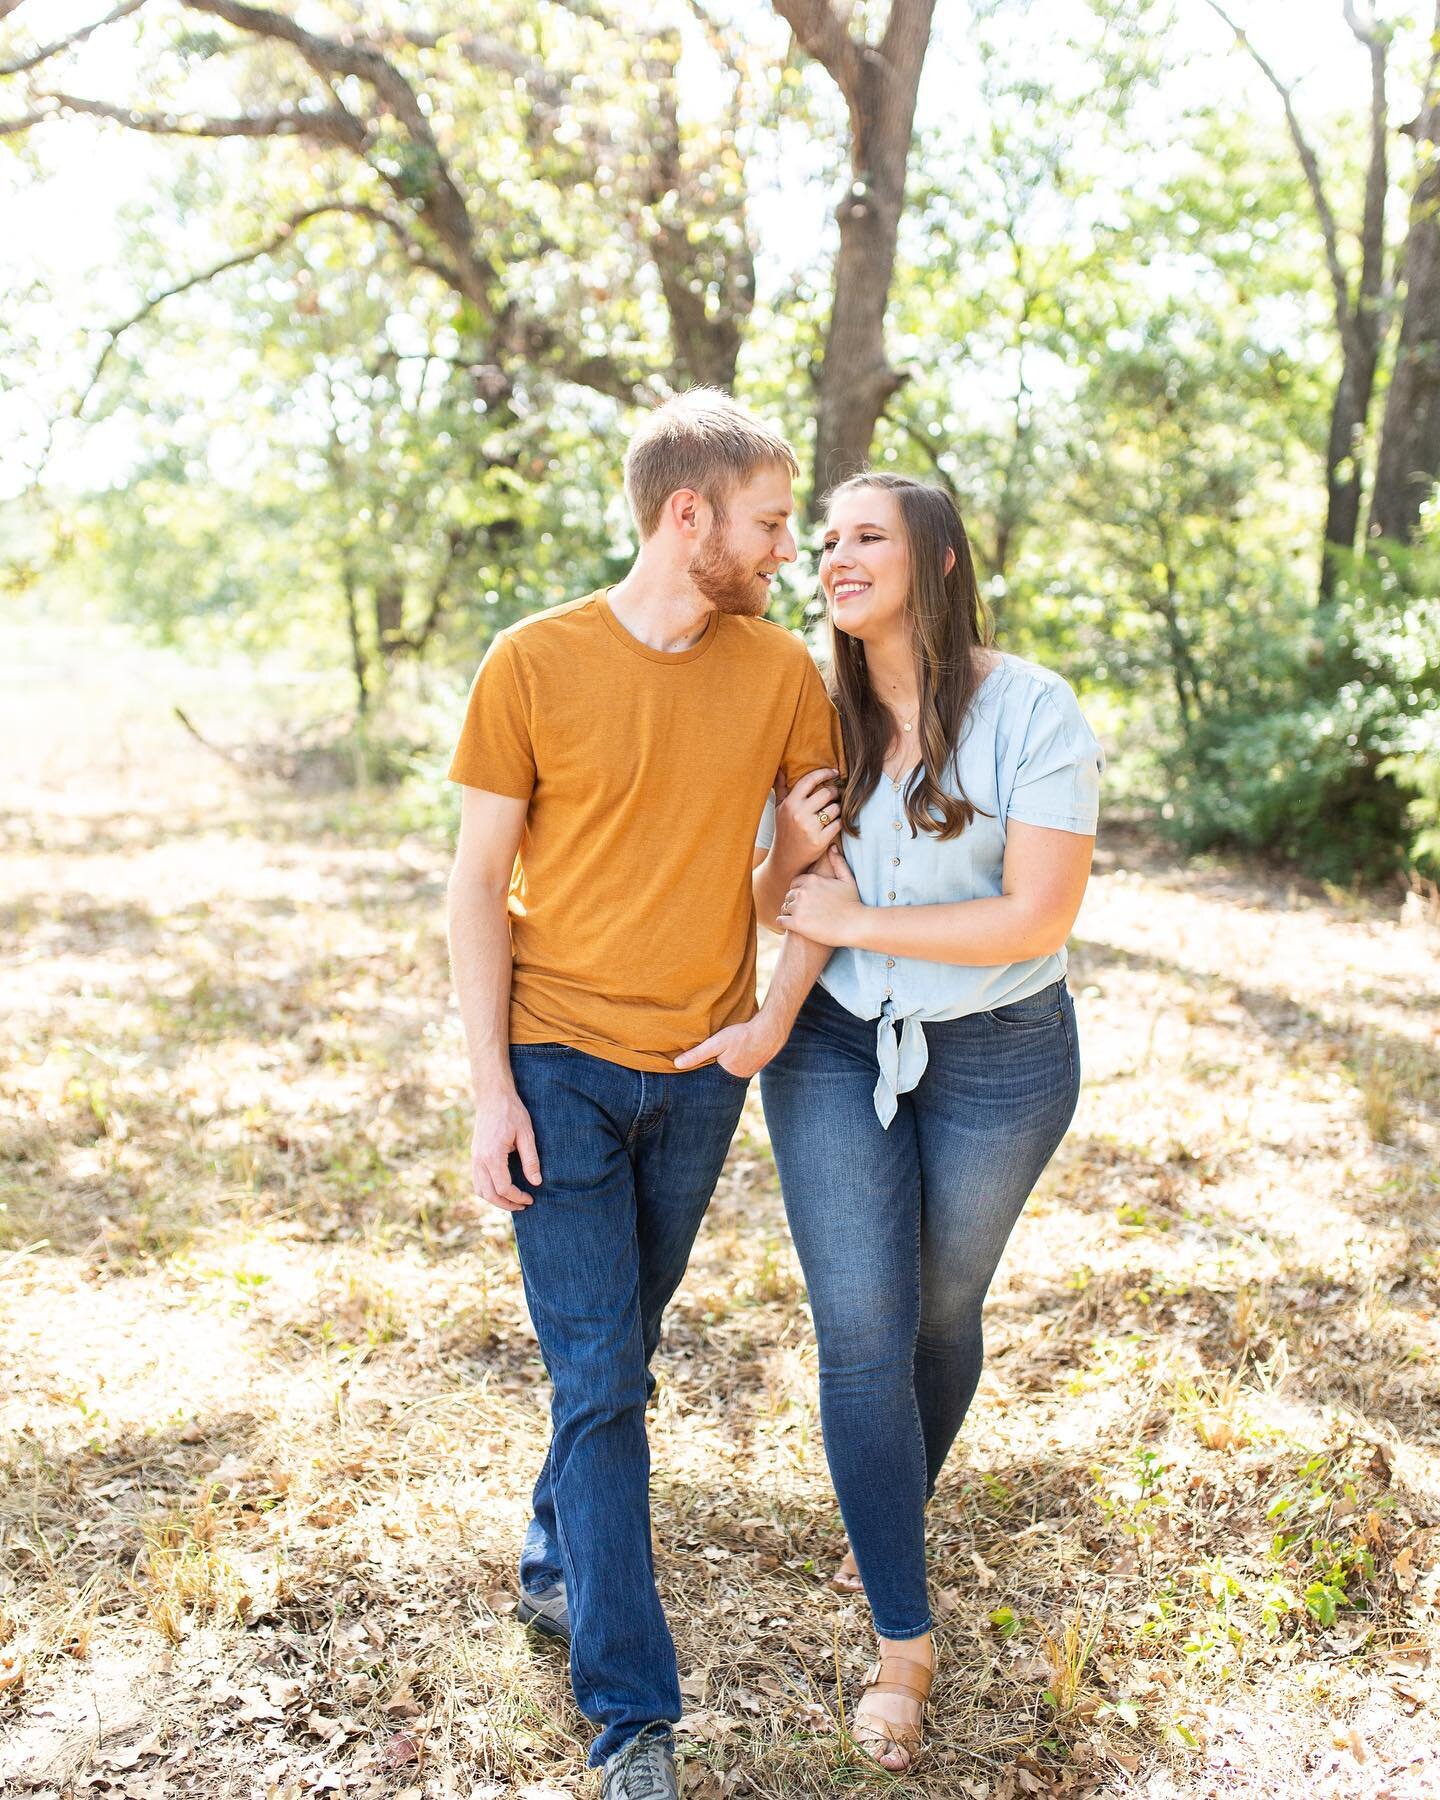 Ohh heck yes... today is the day to #wifeupfife ✨ excited to be @starhillranch for @itsfifeoclocksomewhere  and Andrew&rsquo;s wedding! We took their engagement photos almost a year ago on Andrew&rsquo;s family&rsquo;s property!